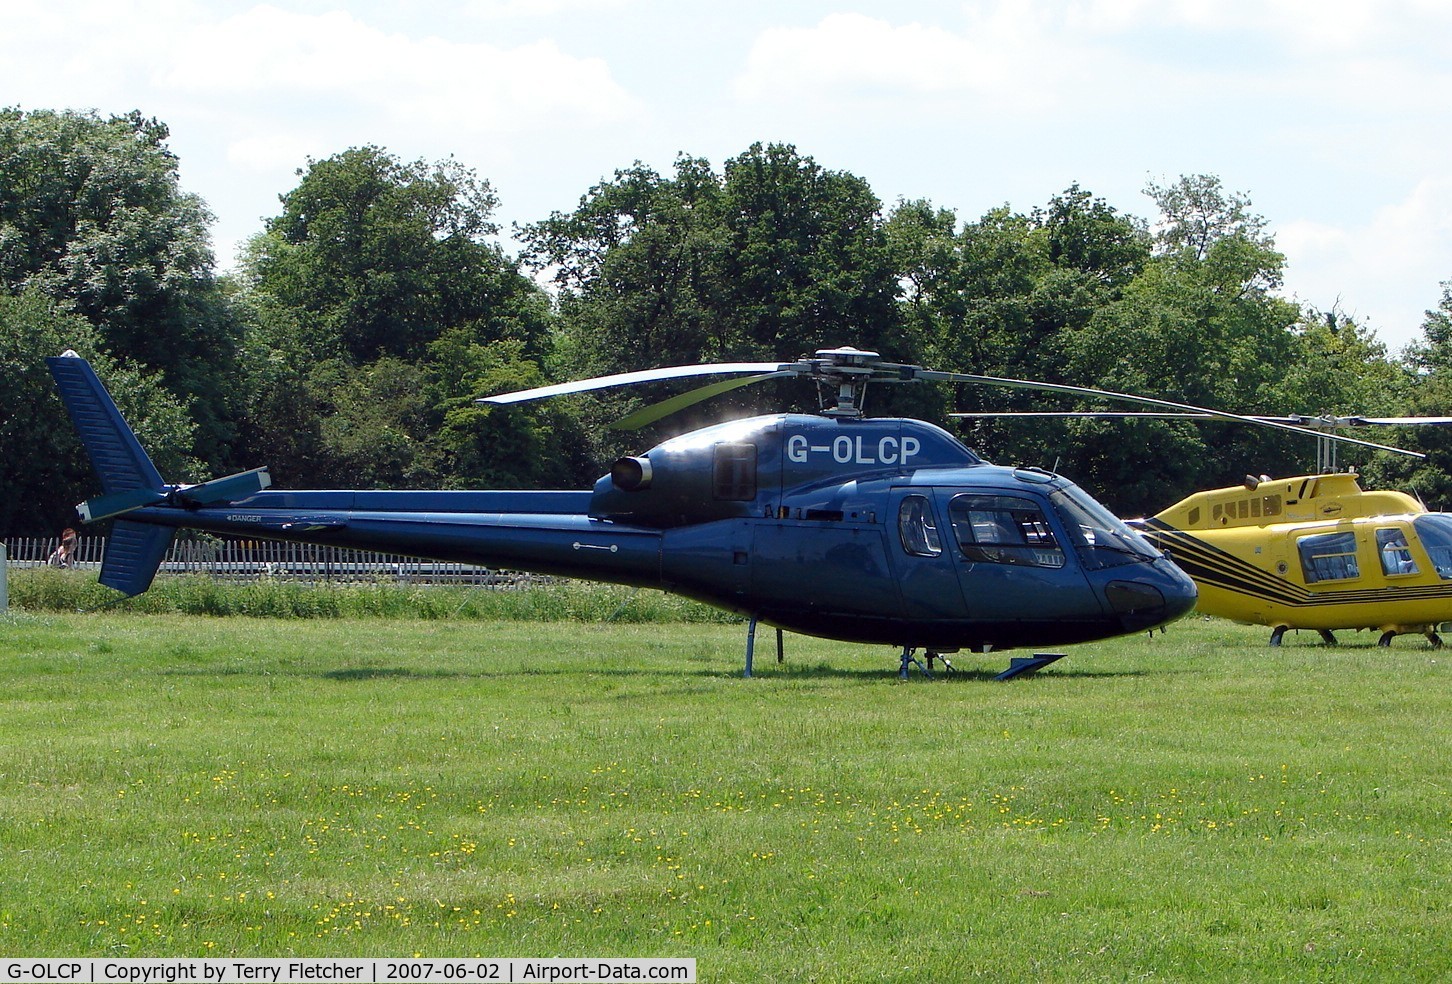 G-OLCP, 1994 Eurocopter AS-355N Ecureuil 2 C/N 5580, Helicopters arrive at the temporary Heliport on 2007 Epsom Derby Day (Horse racing)